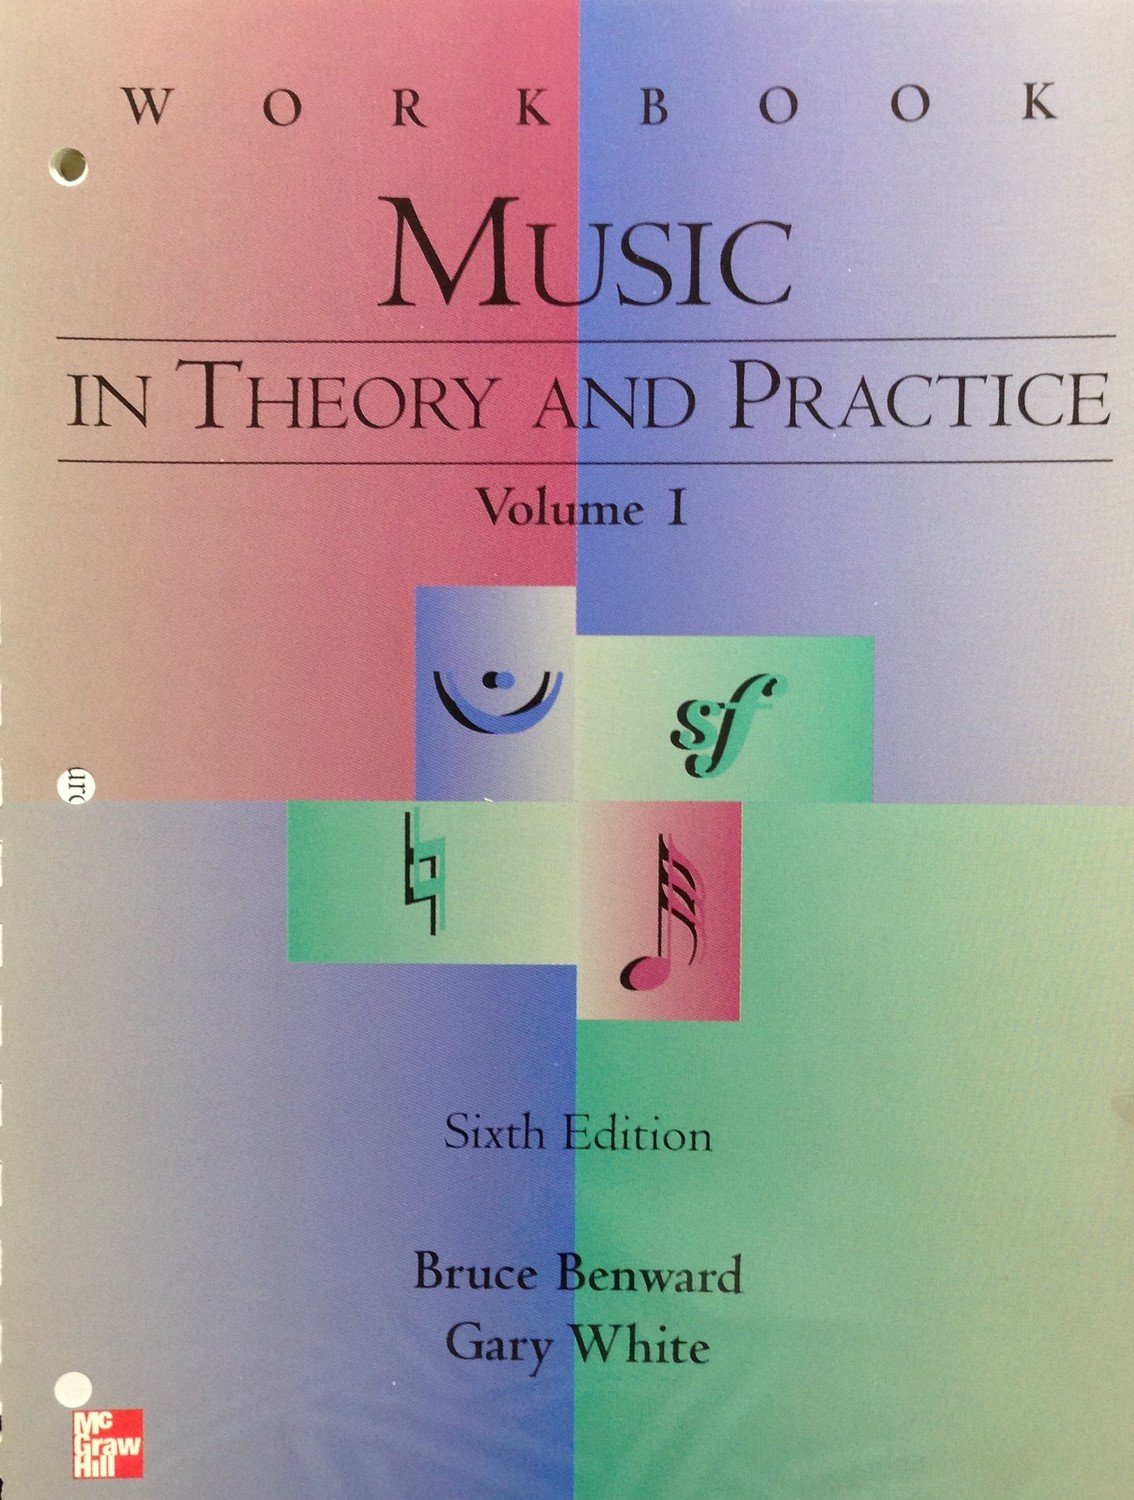 Music in Theory and Practice Volume I Workbook:  Sixth Edition